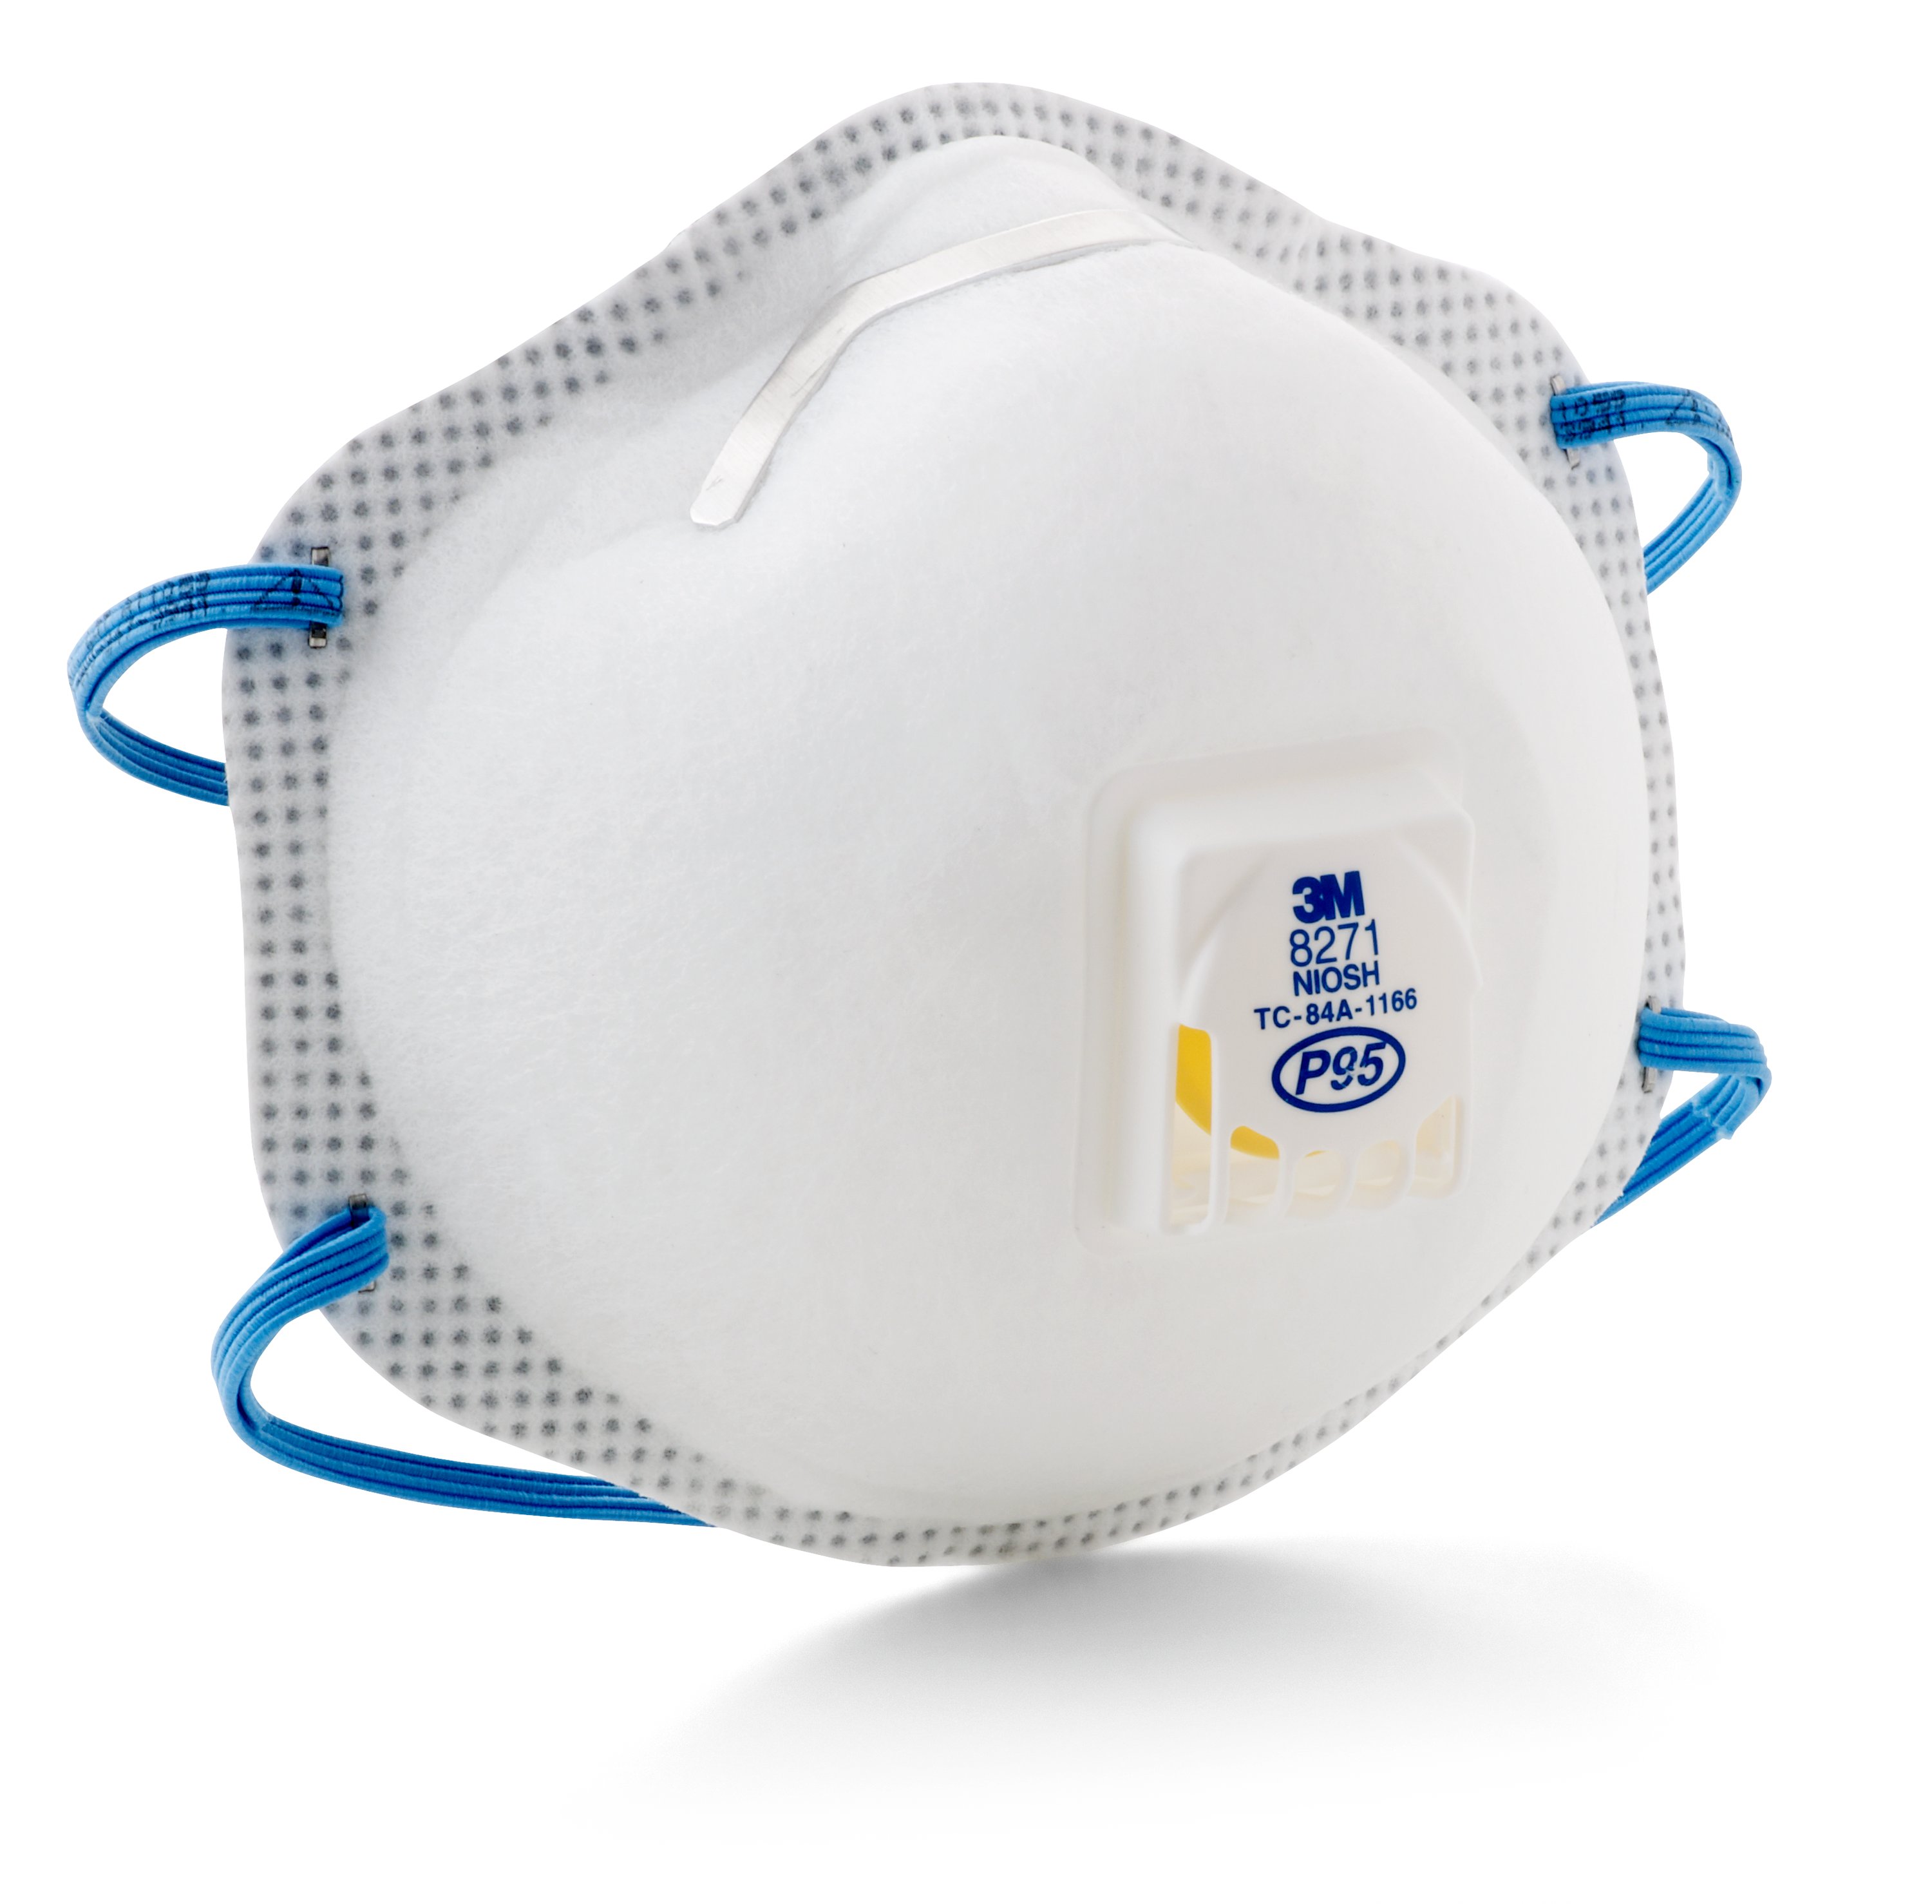 3M™ 8271 Standard Particulate Respirator, Resists: Oil and Non-Oil Based Particles